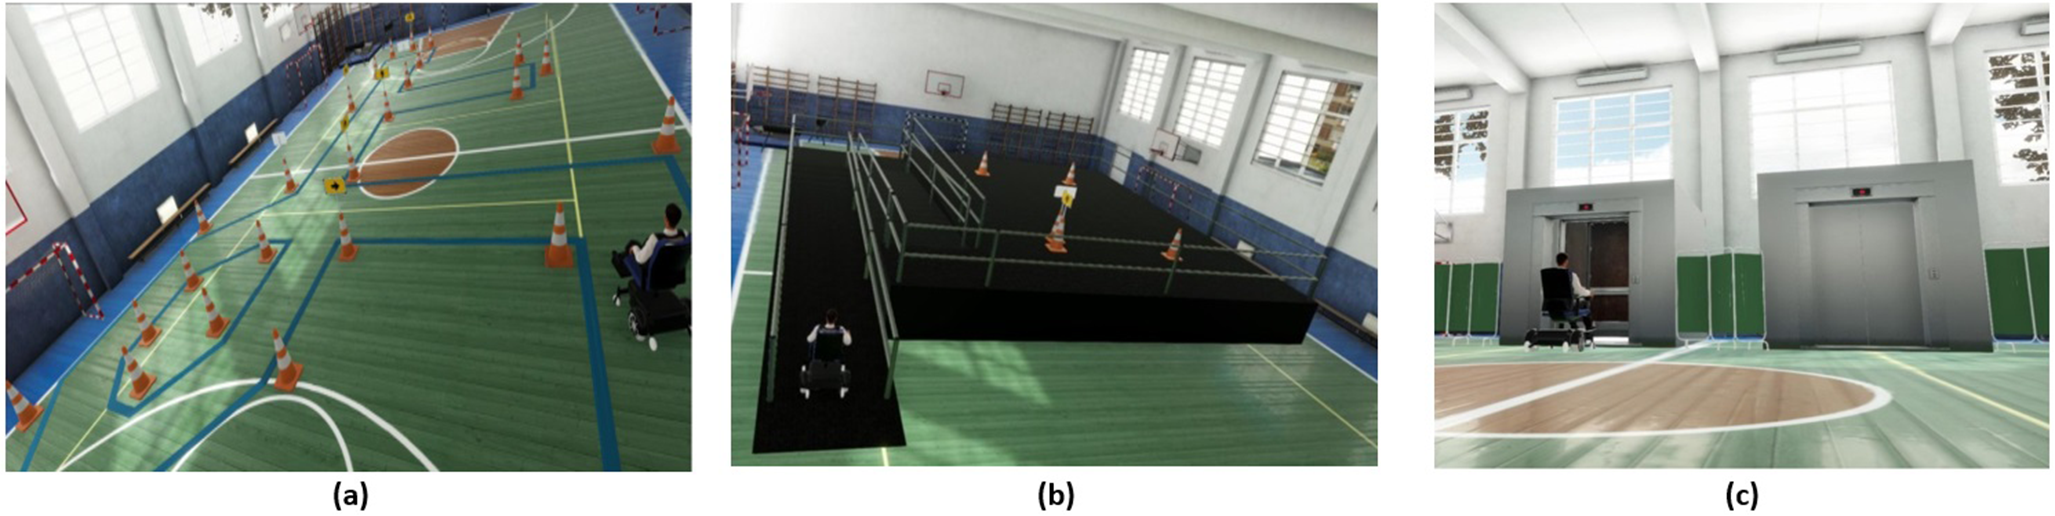 Training protocol for driving power wheelchairs using virtual environment: preliminary results from a pilot study